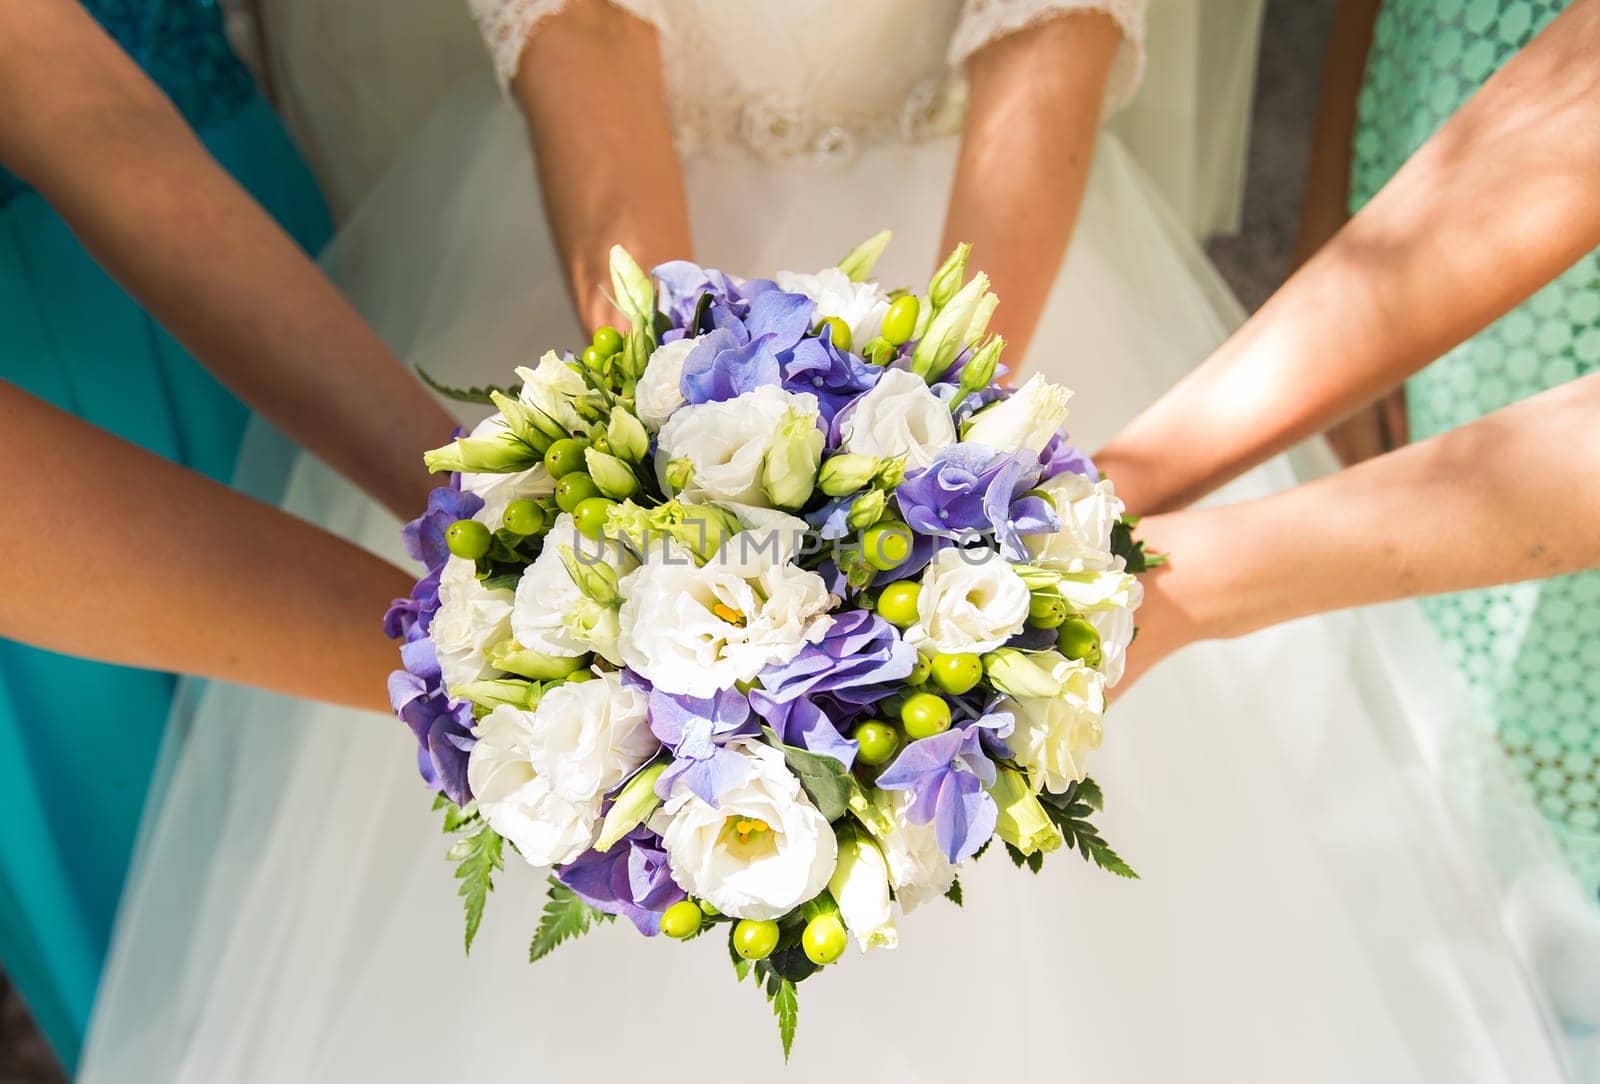 Close up of bride and bridesmaids bouquet by Satura86